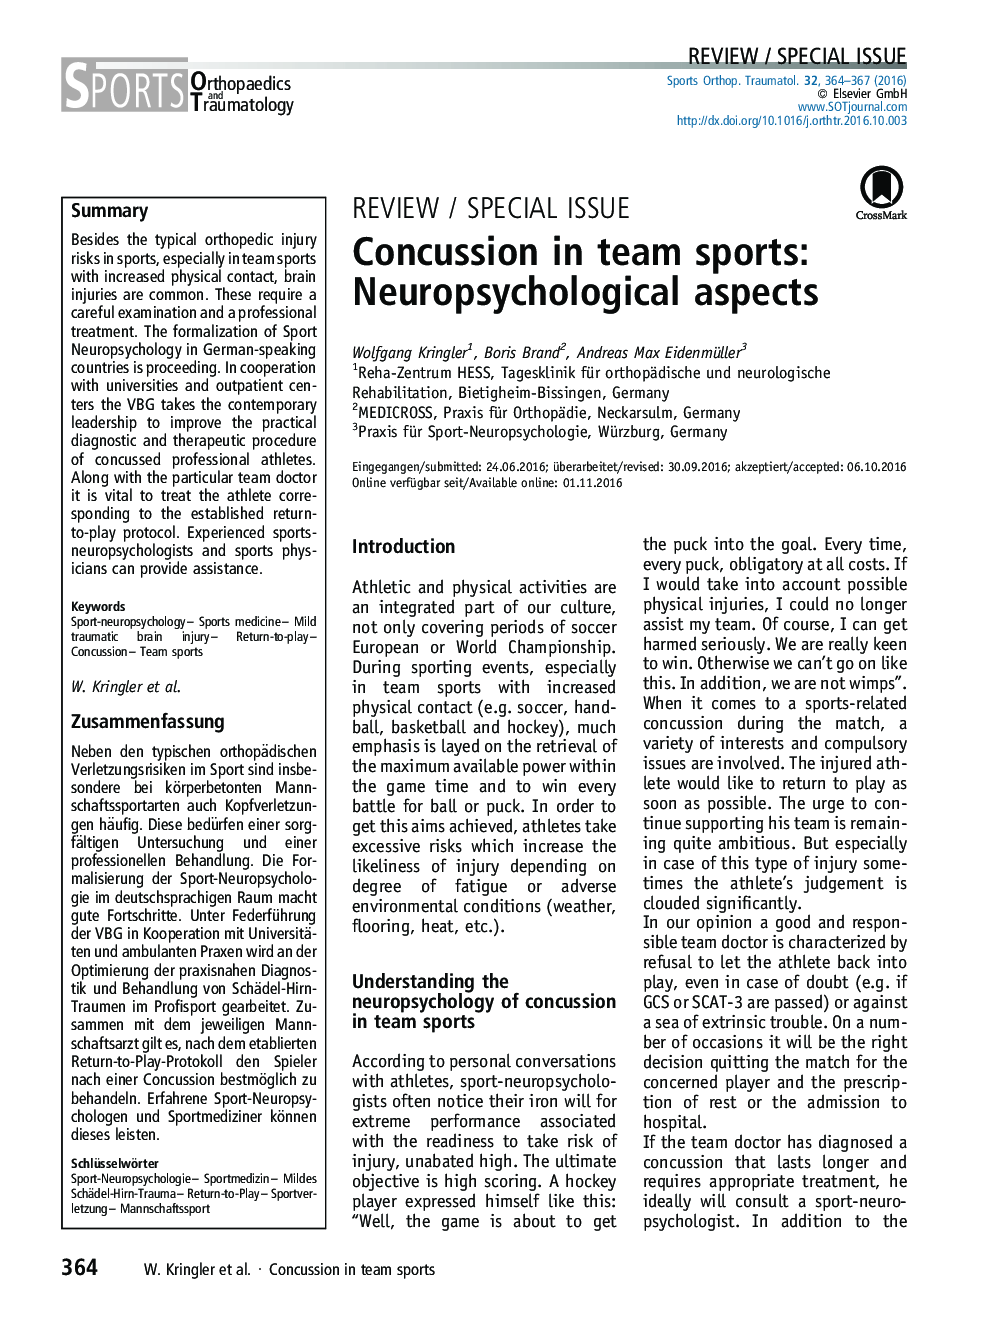 Concussion in team sports: Neuropsychological aspects